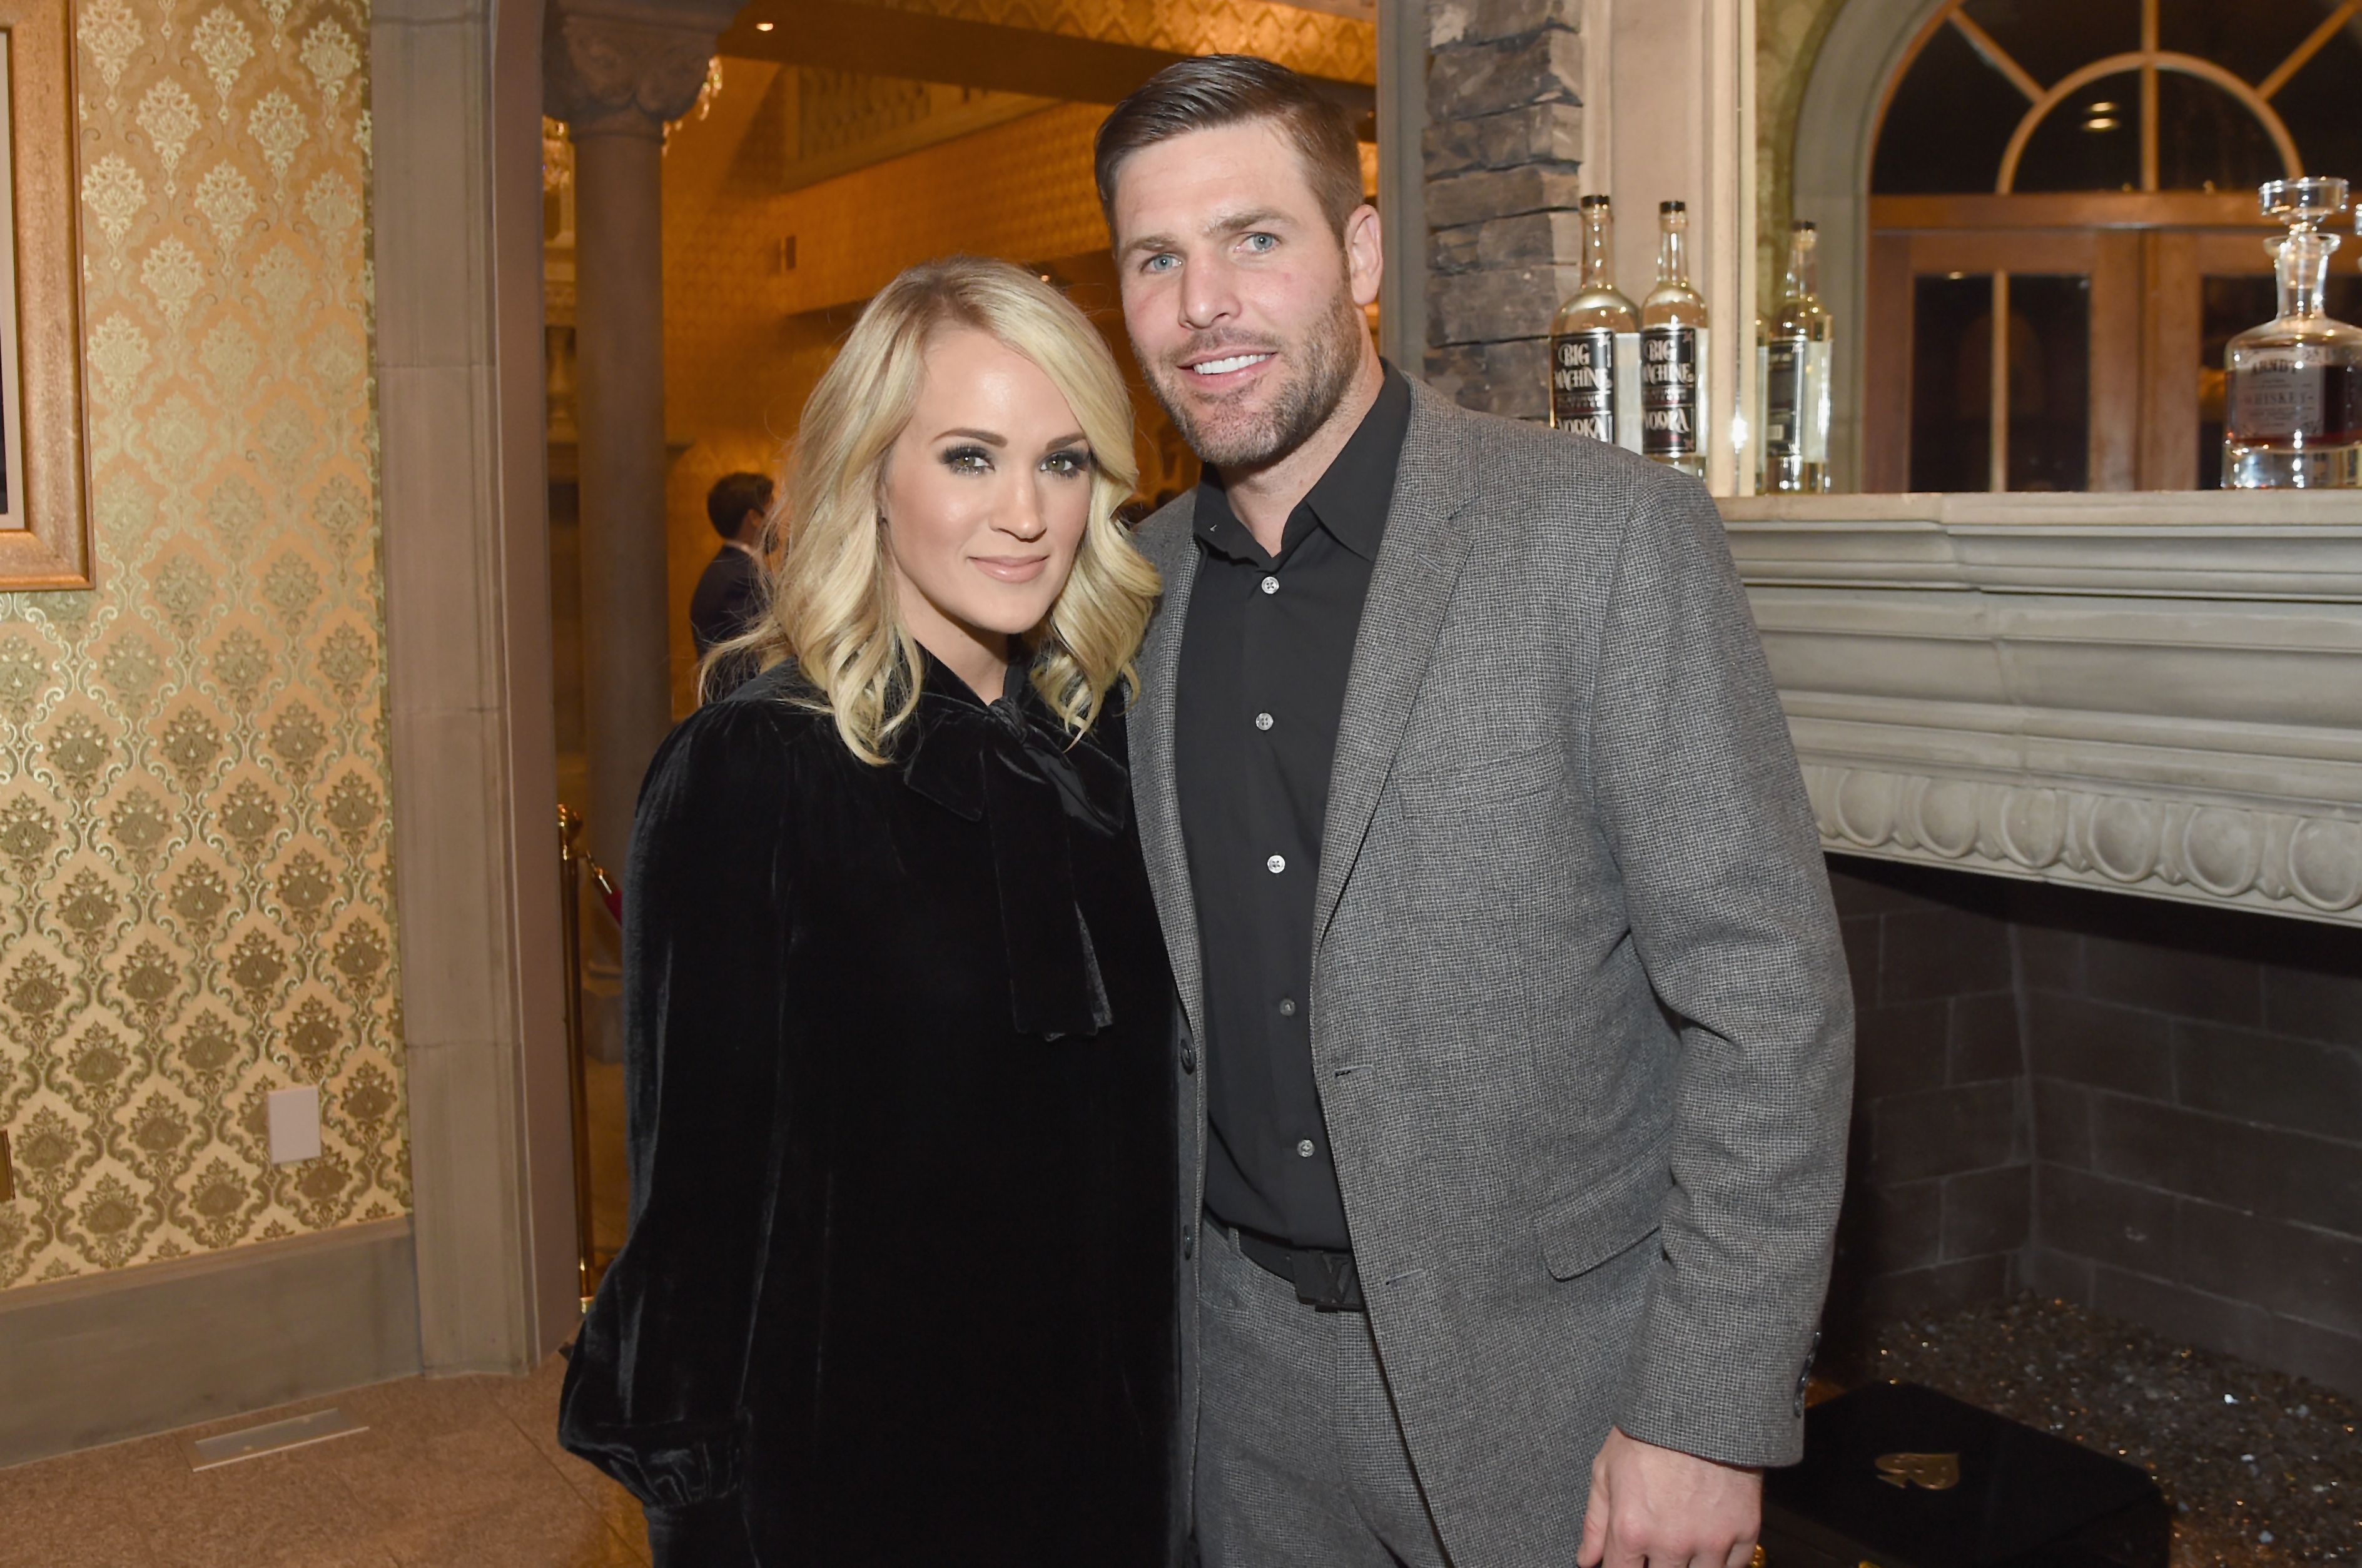 Carrie Underwood and Mike Fisher at Nashville Shines for Haiti on October 24, 2017, in Brentwood, Tennessee. | Source: Rick Diamond/Getty Images